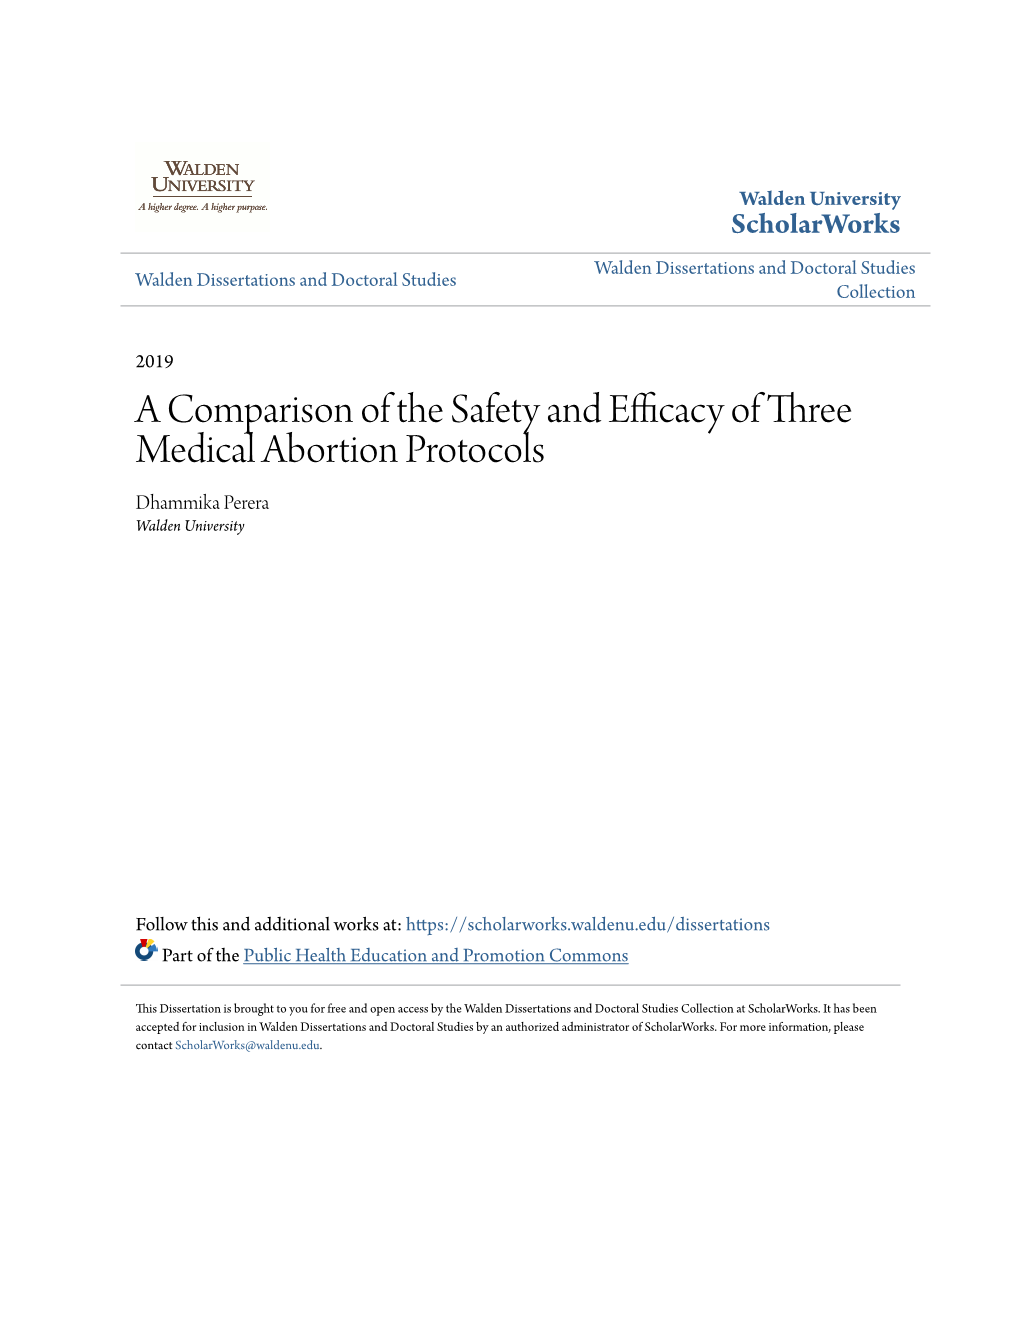 A Comparison of the Safety and Efficacy of Three Medical Abortion Protocols Dhammika Perera Walden University